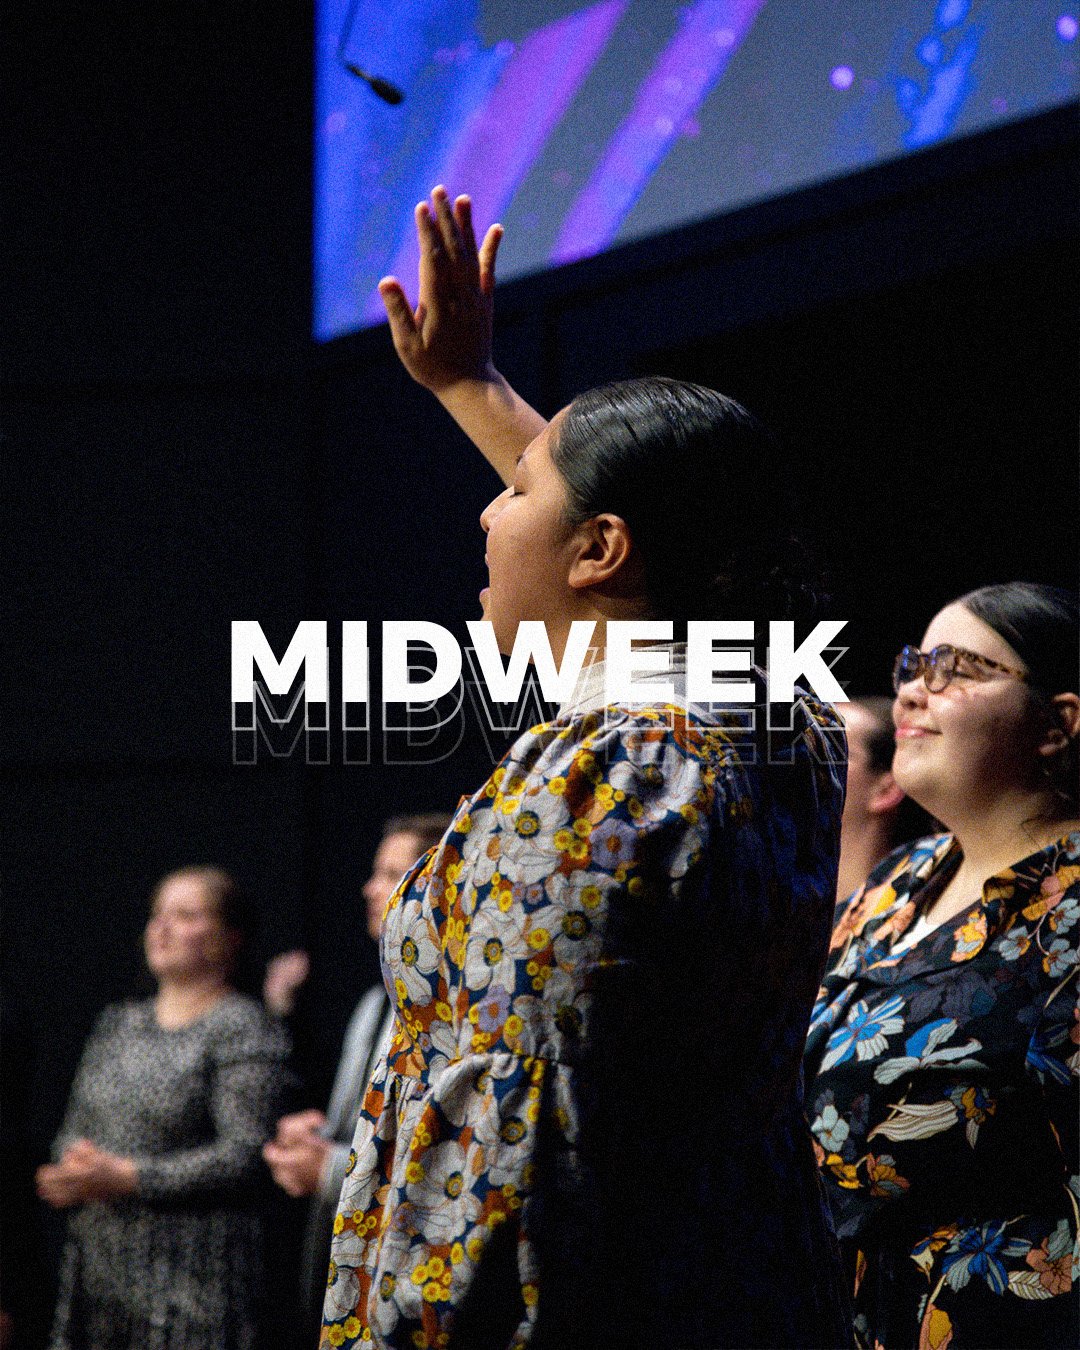 Midweek at FPC is tonight! We can't wait to worship with you. See you at 7p 🙌

#FPCAnderson #MidweekMatters